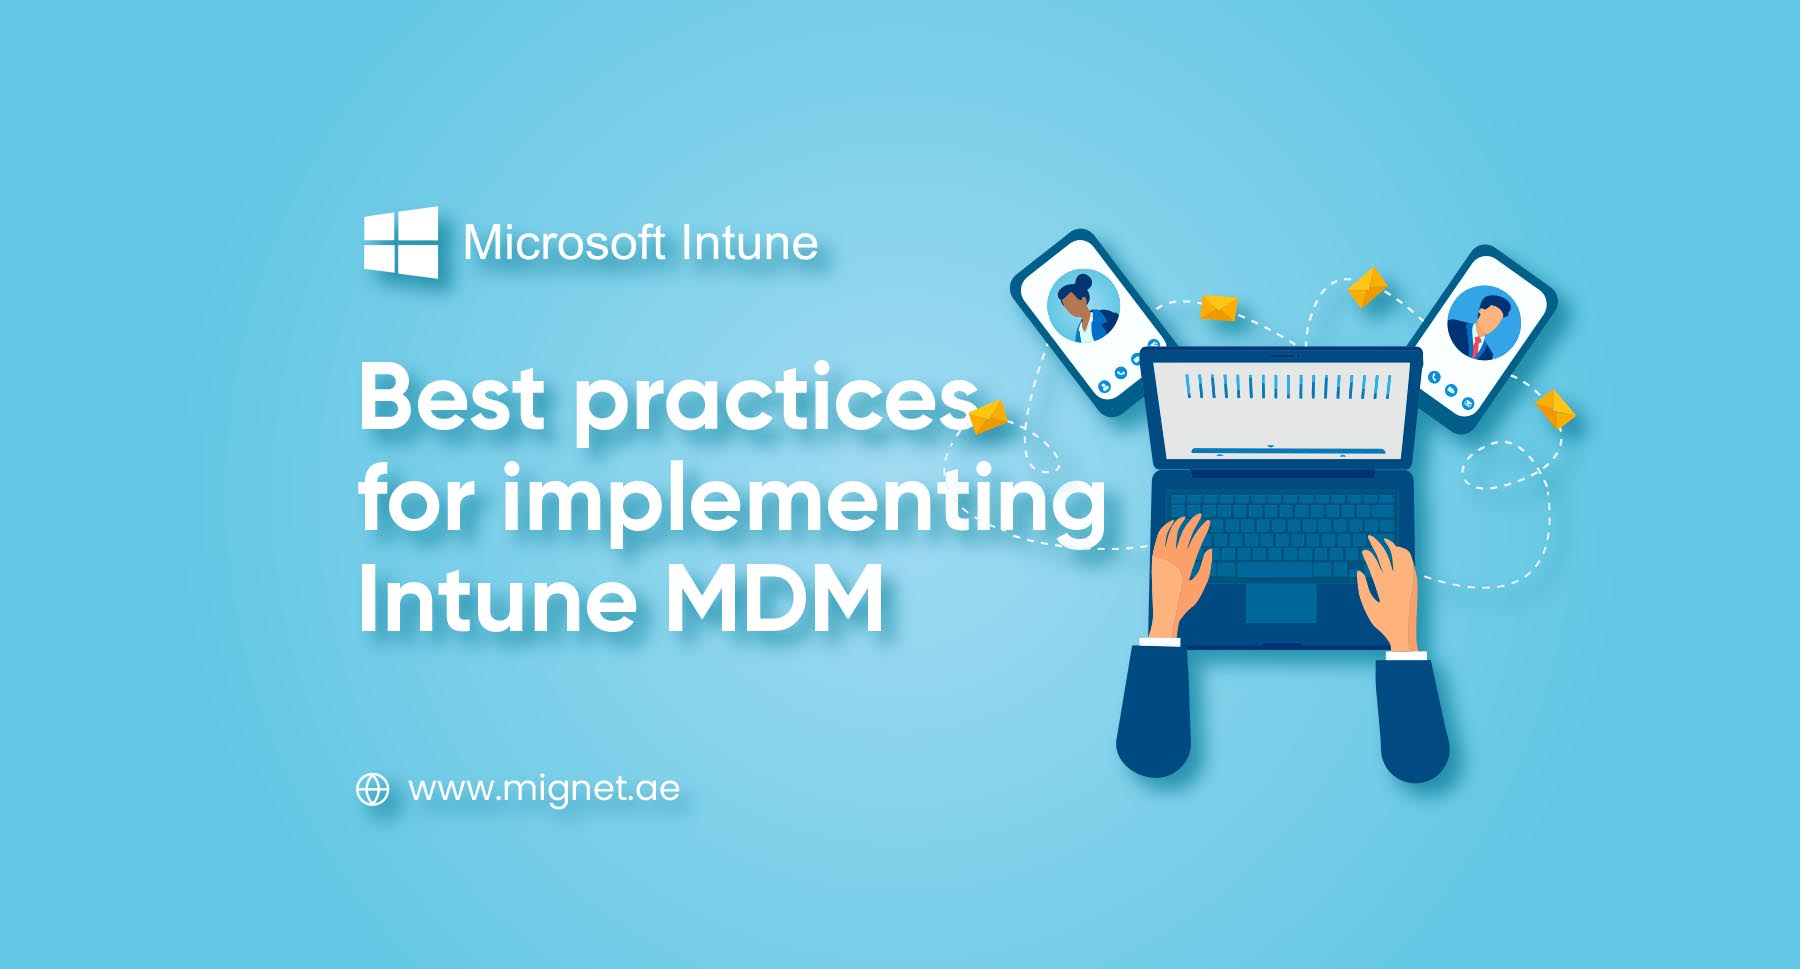 Best practices for implementing Intune MDM